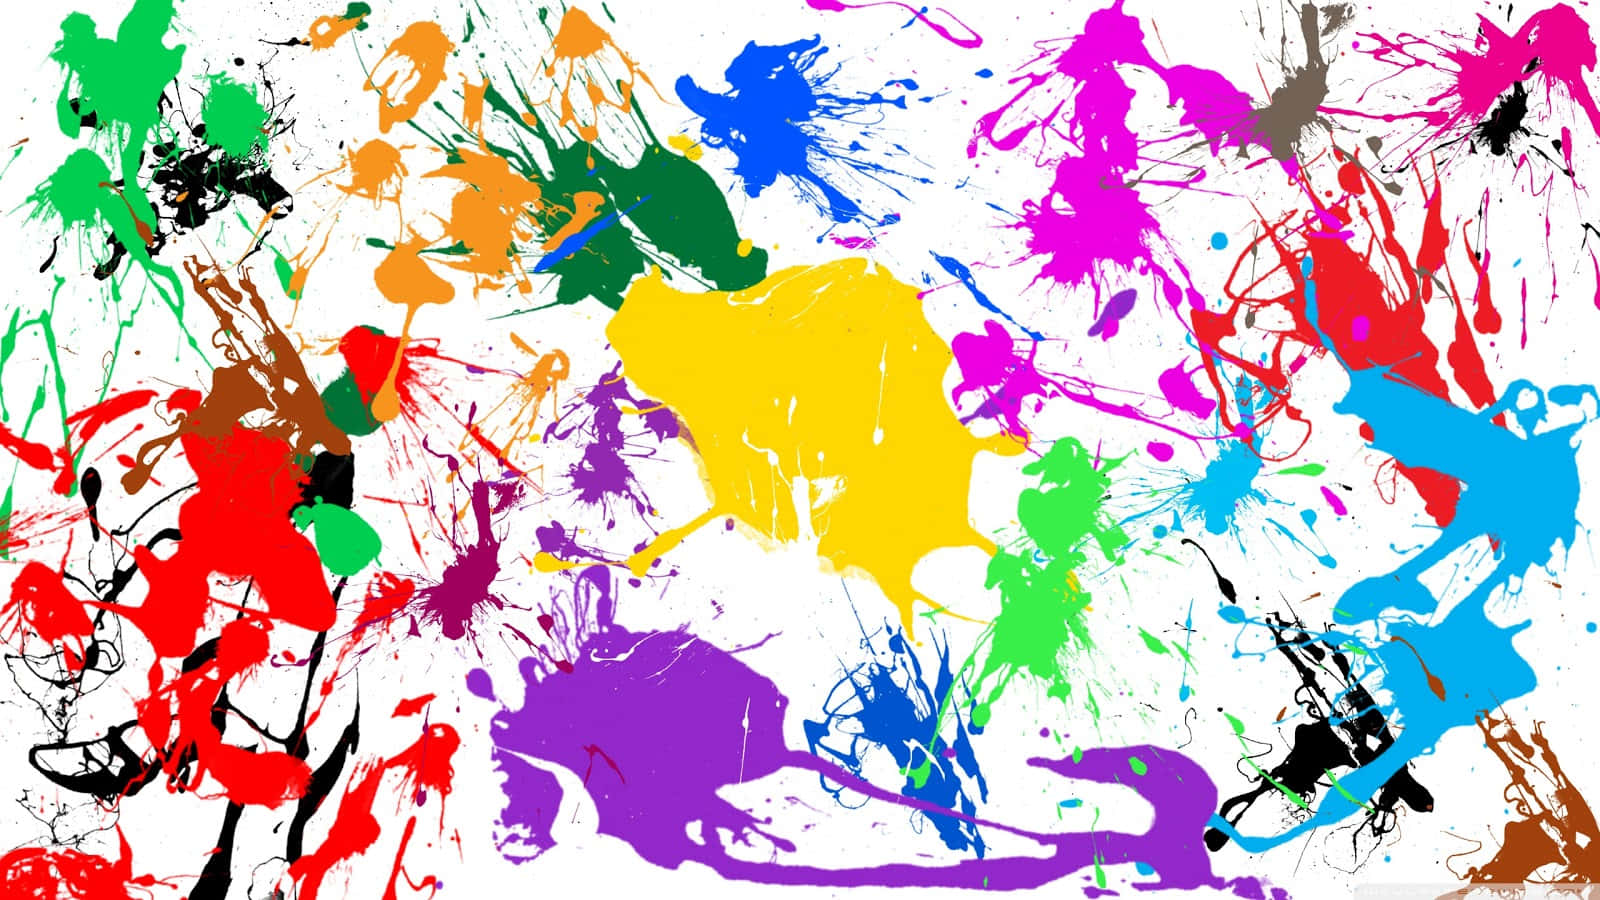 Swirling Colors of Artistic Expression Wallpaper